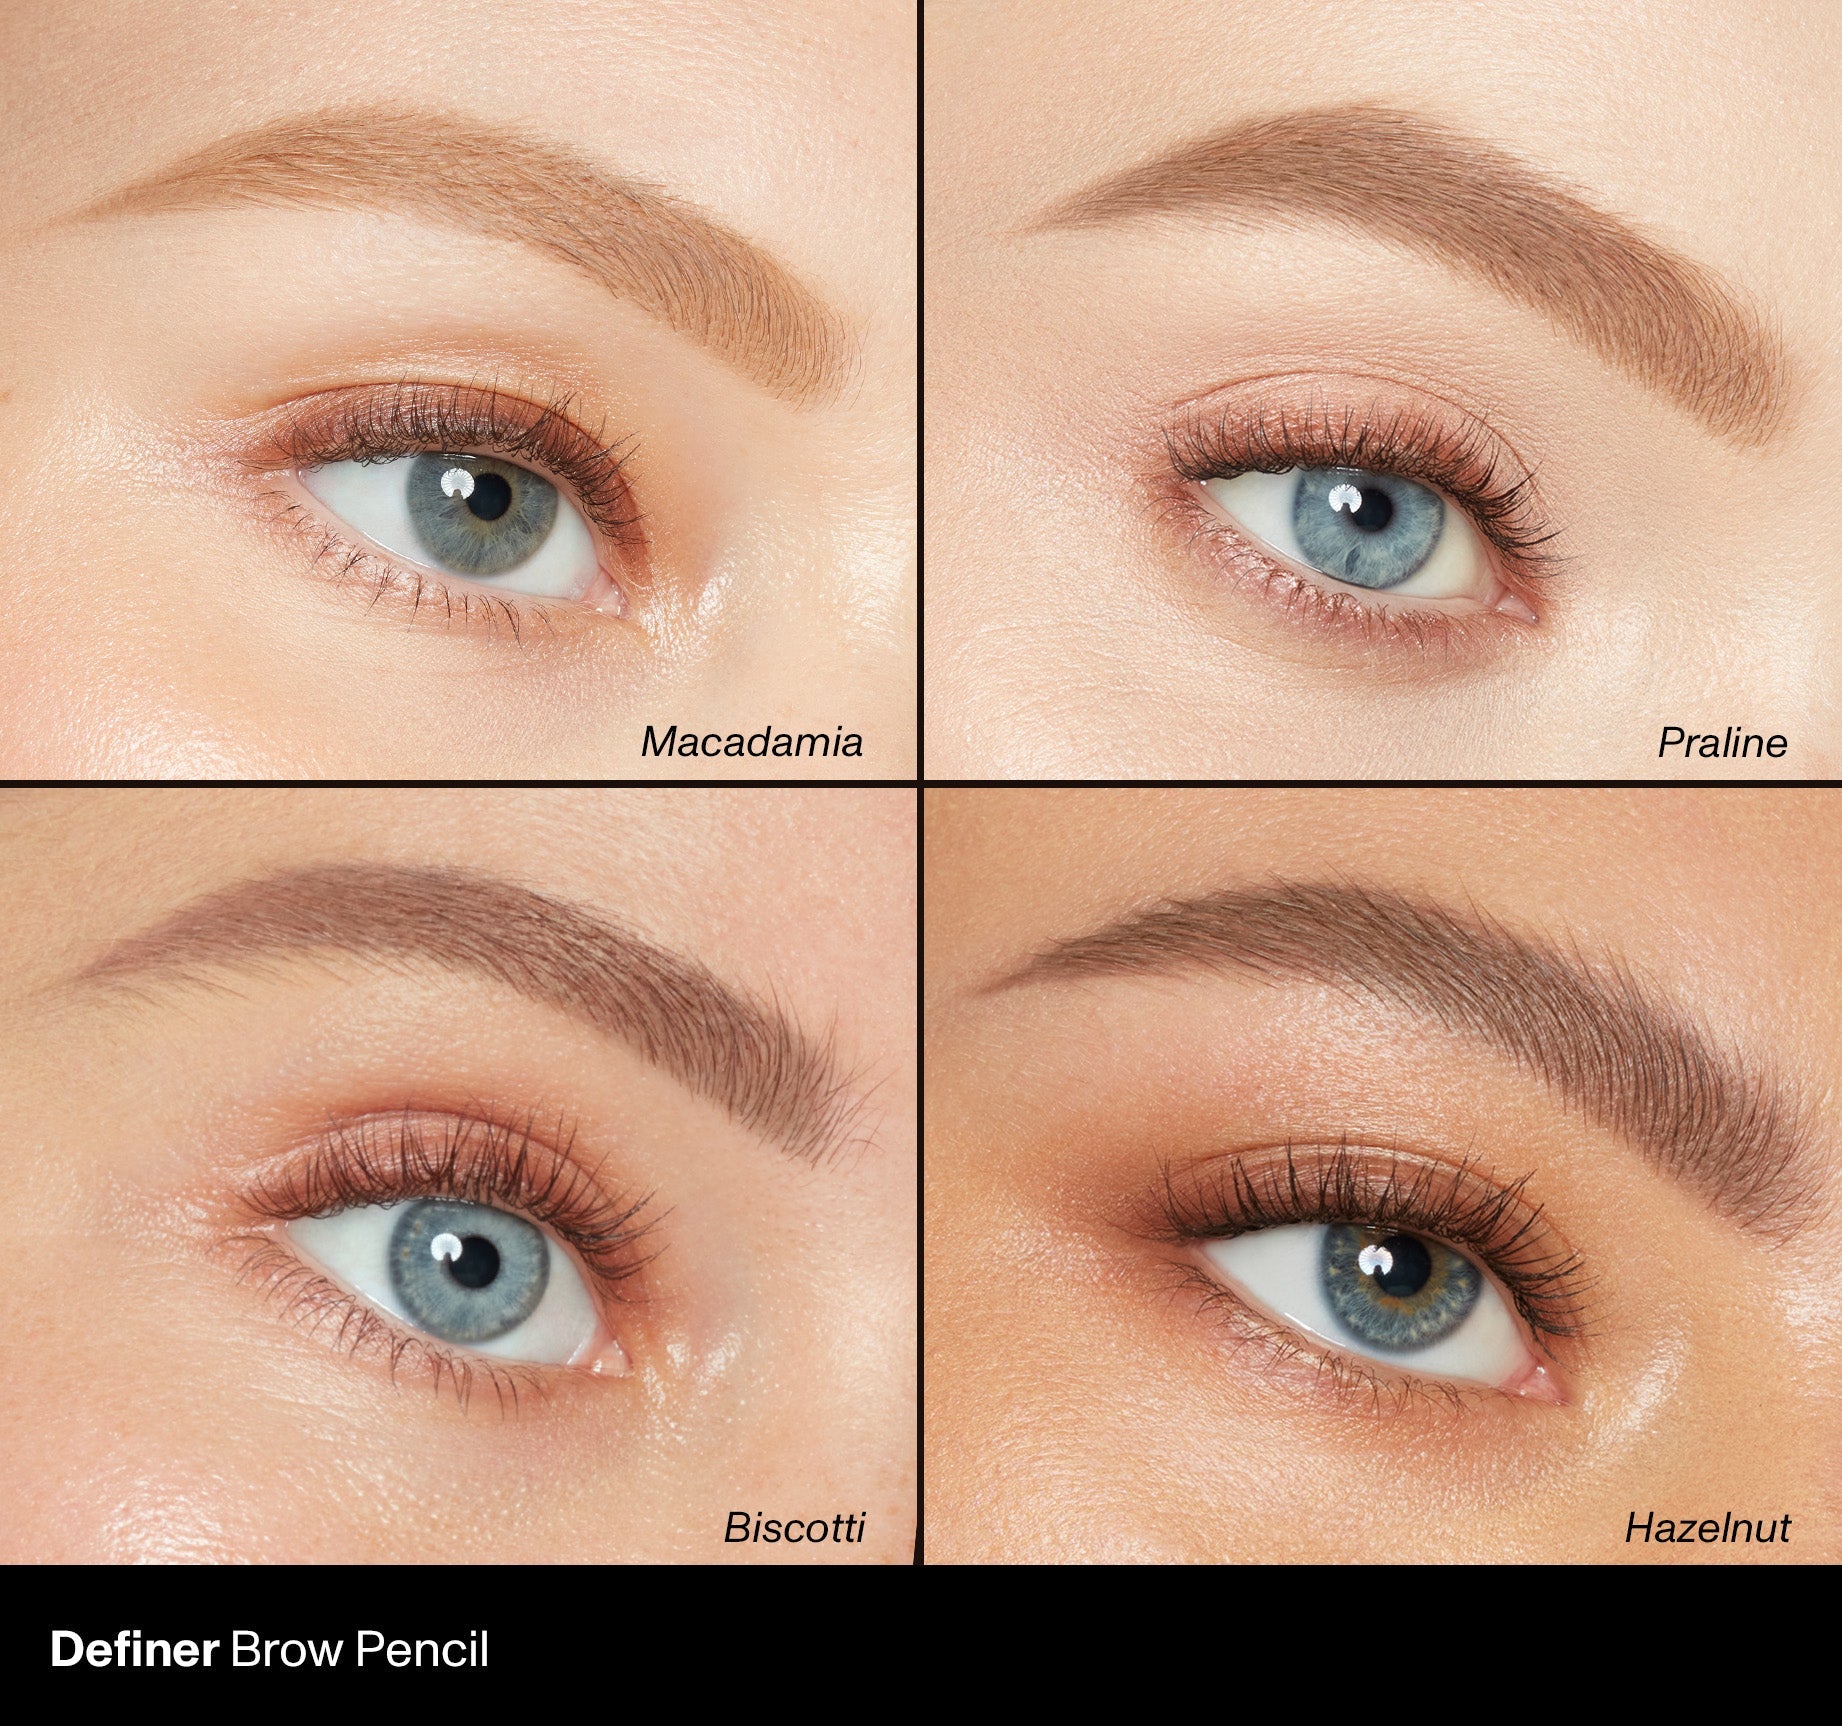 Definer Dual-Ended Brow Pencil & Spoolie - Biscotti - Image 3